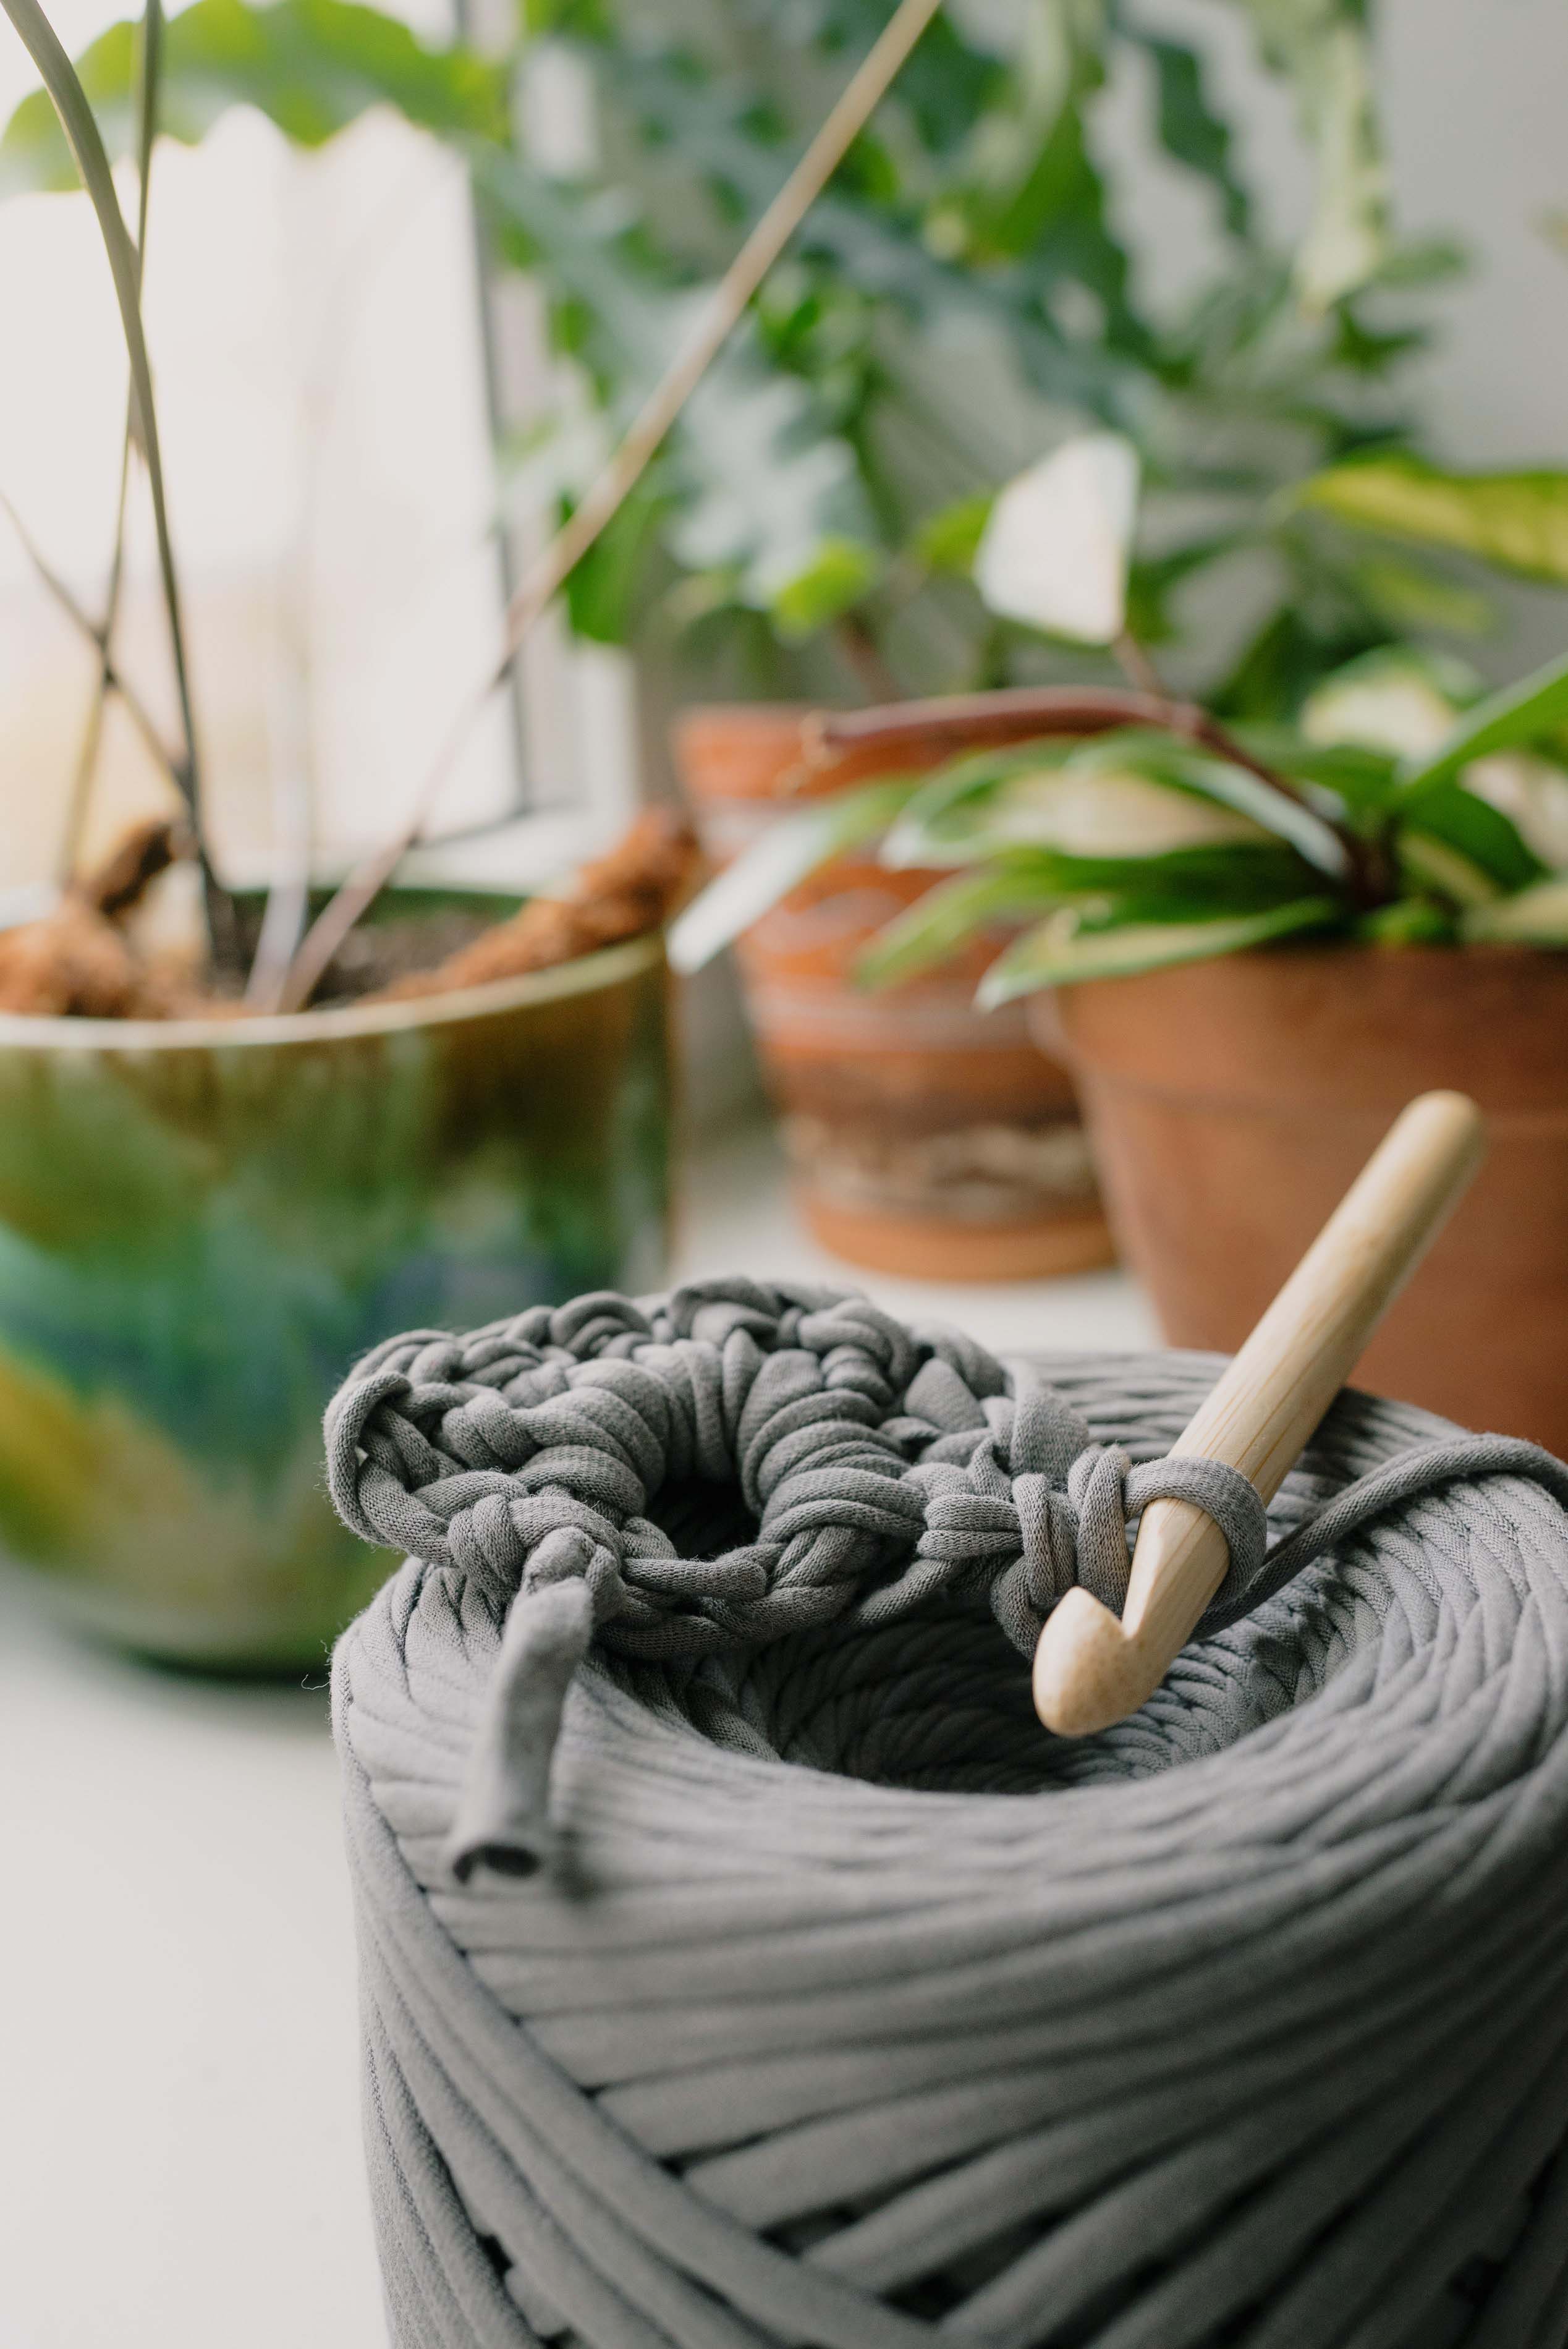 Leisure time at Handmade-Spinus, crocheting and plants companions